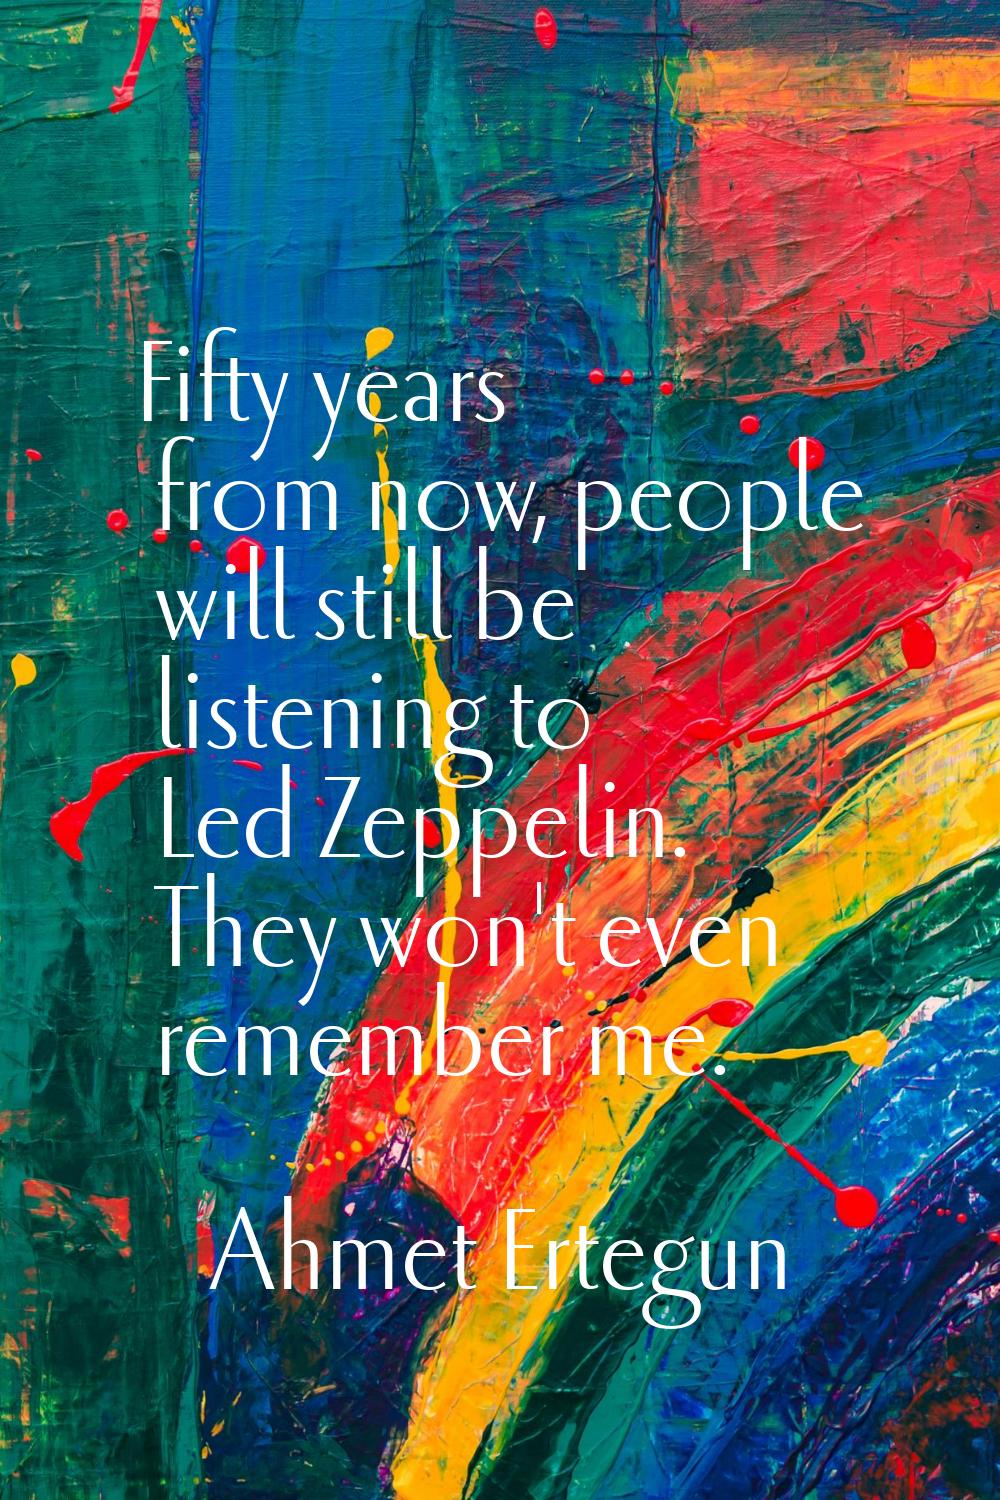 Fifty years from now, people will still be listening to Led Zeppelin. They won't even remember me.